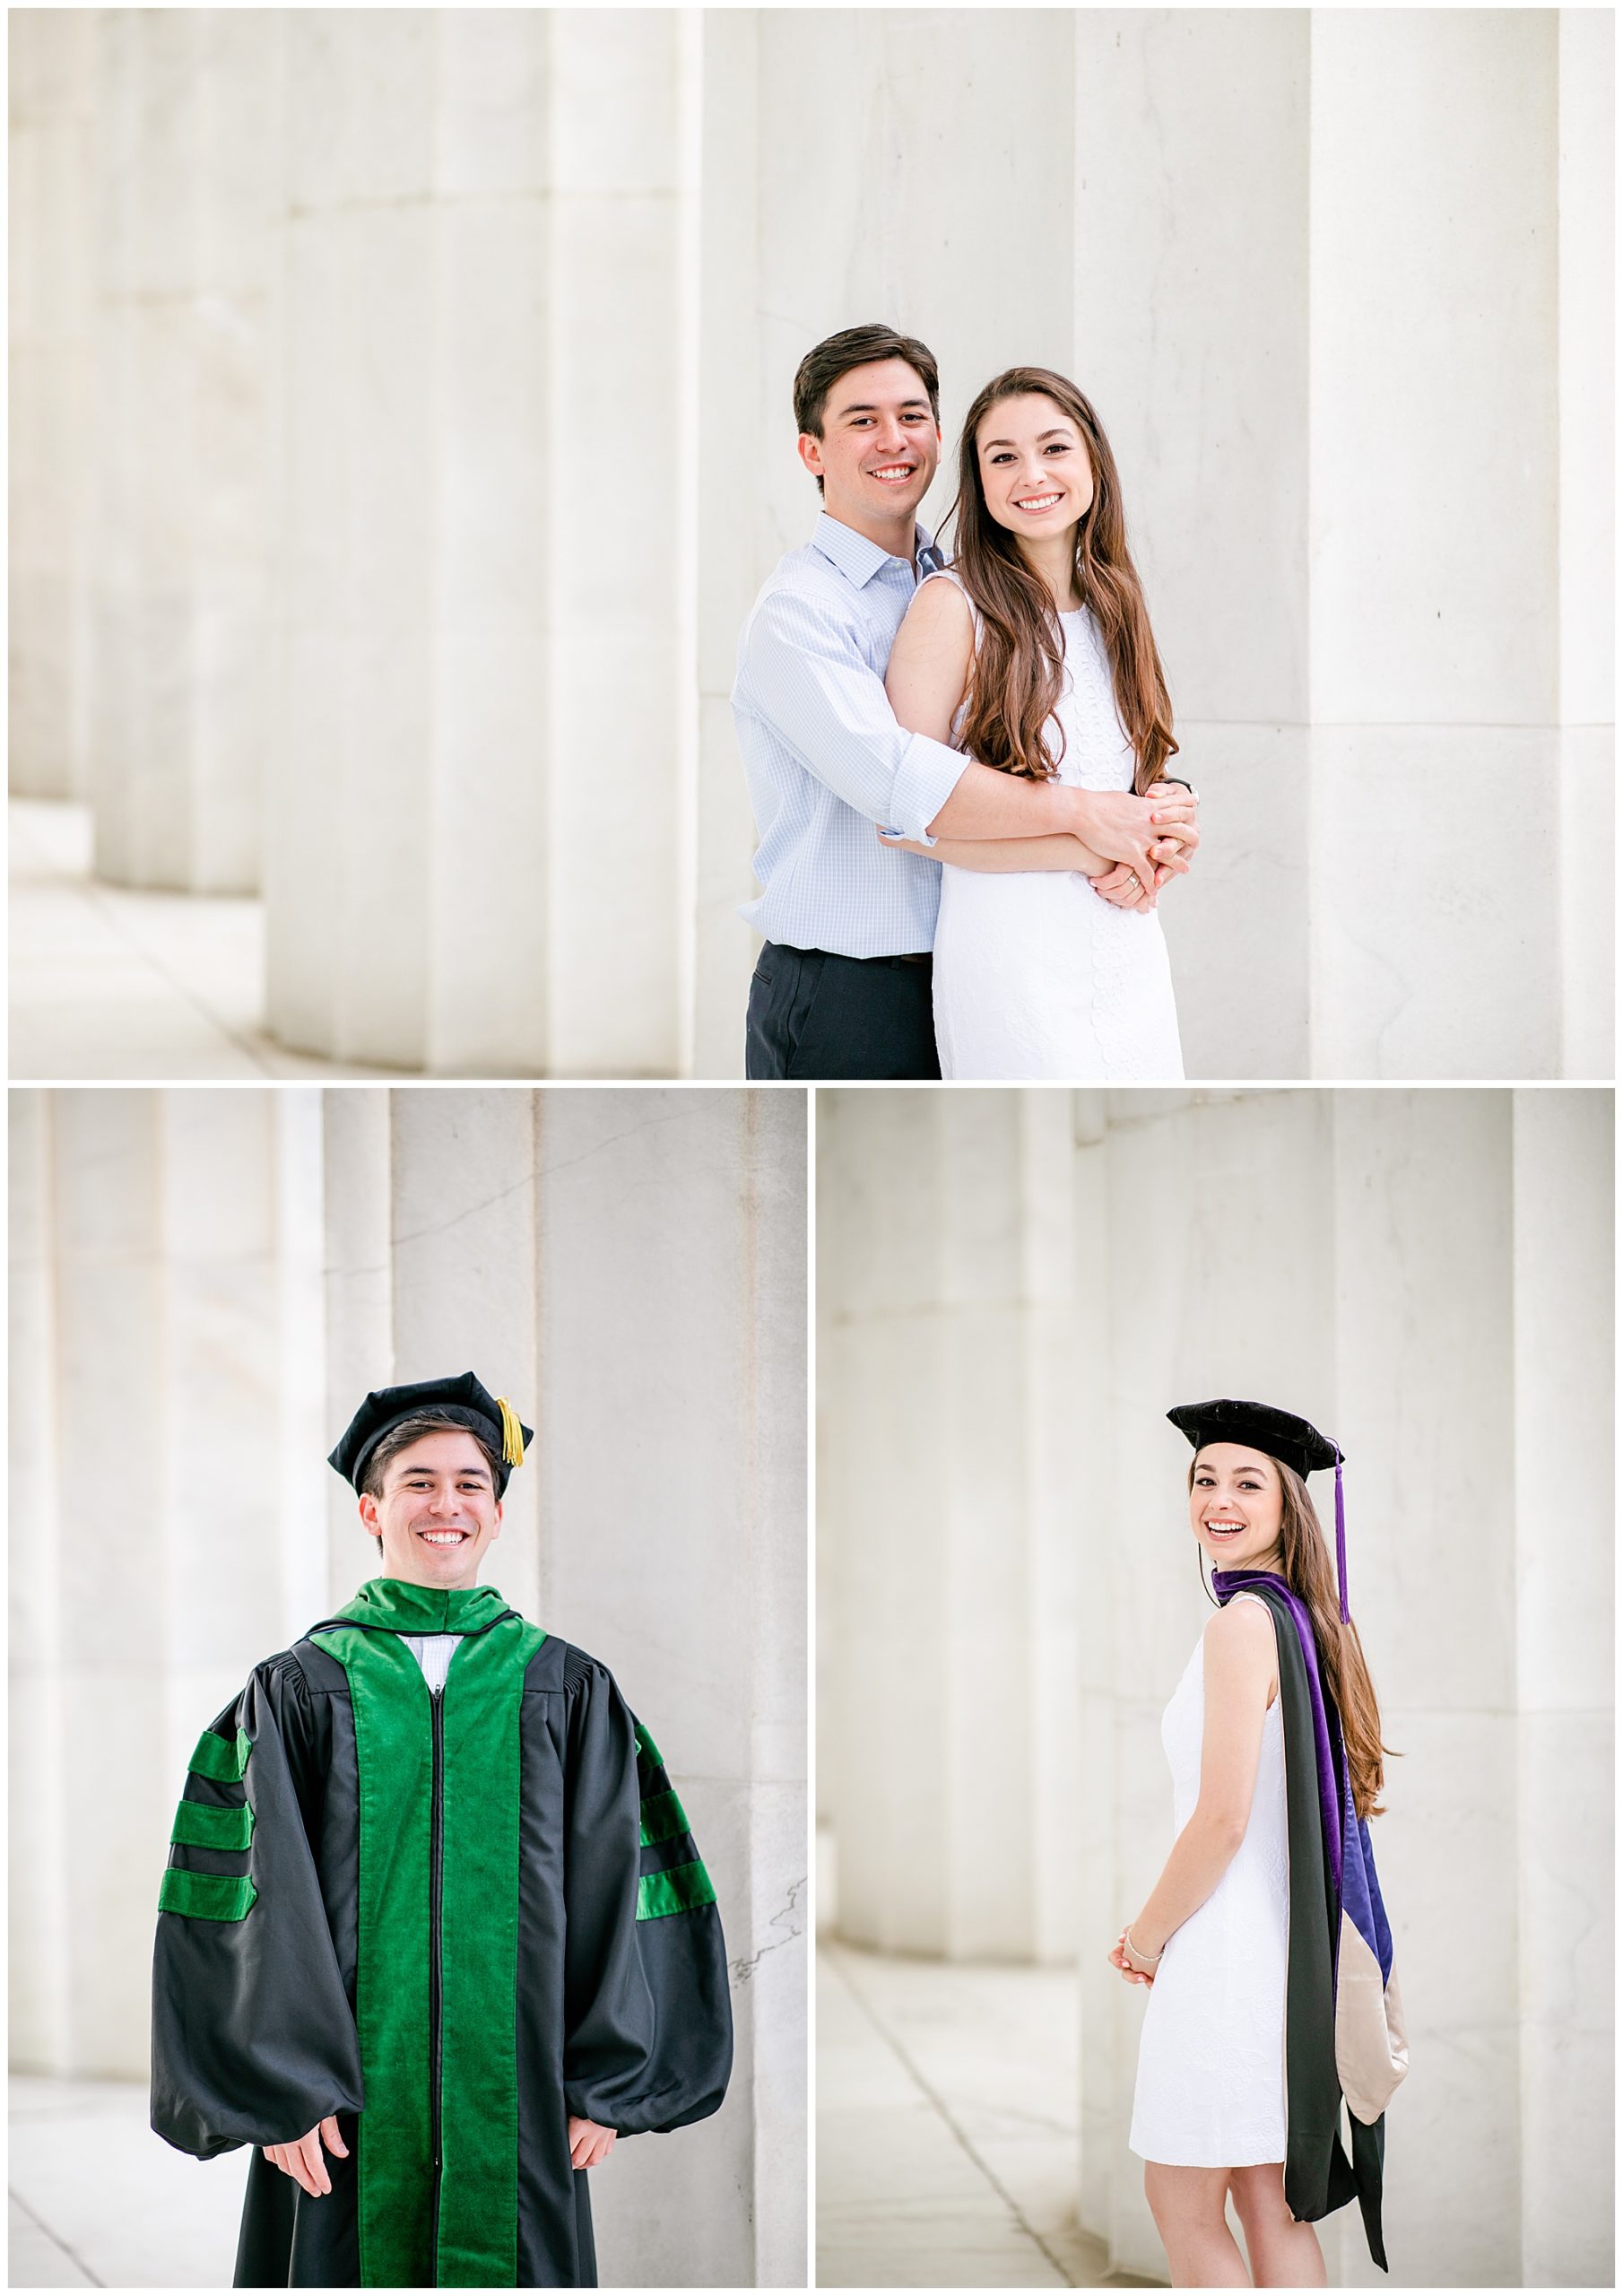 DC couple graduation photos, DC graduation portraits, DC grad photos, DC graduation photographer, spring graduation photos, Georgetown Law graduate, GW Medical School graduate, DC law school graduation photos, DC medical school graduation photos, Rachel E.H. Photography, couple hugging in formal outfits, man in cap and gown, woman in graduation cap in Lincoln Memorial